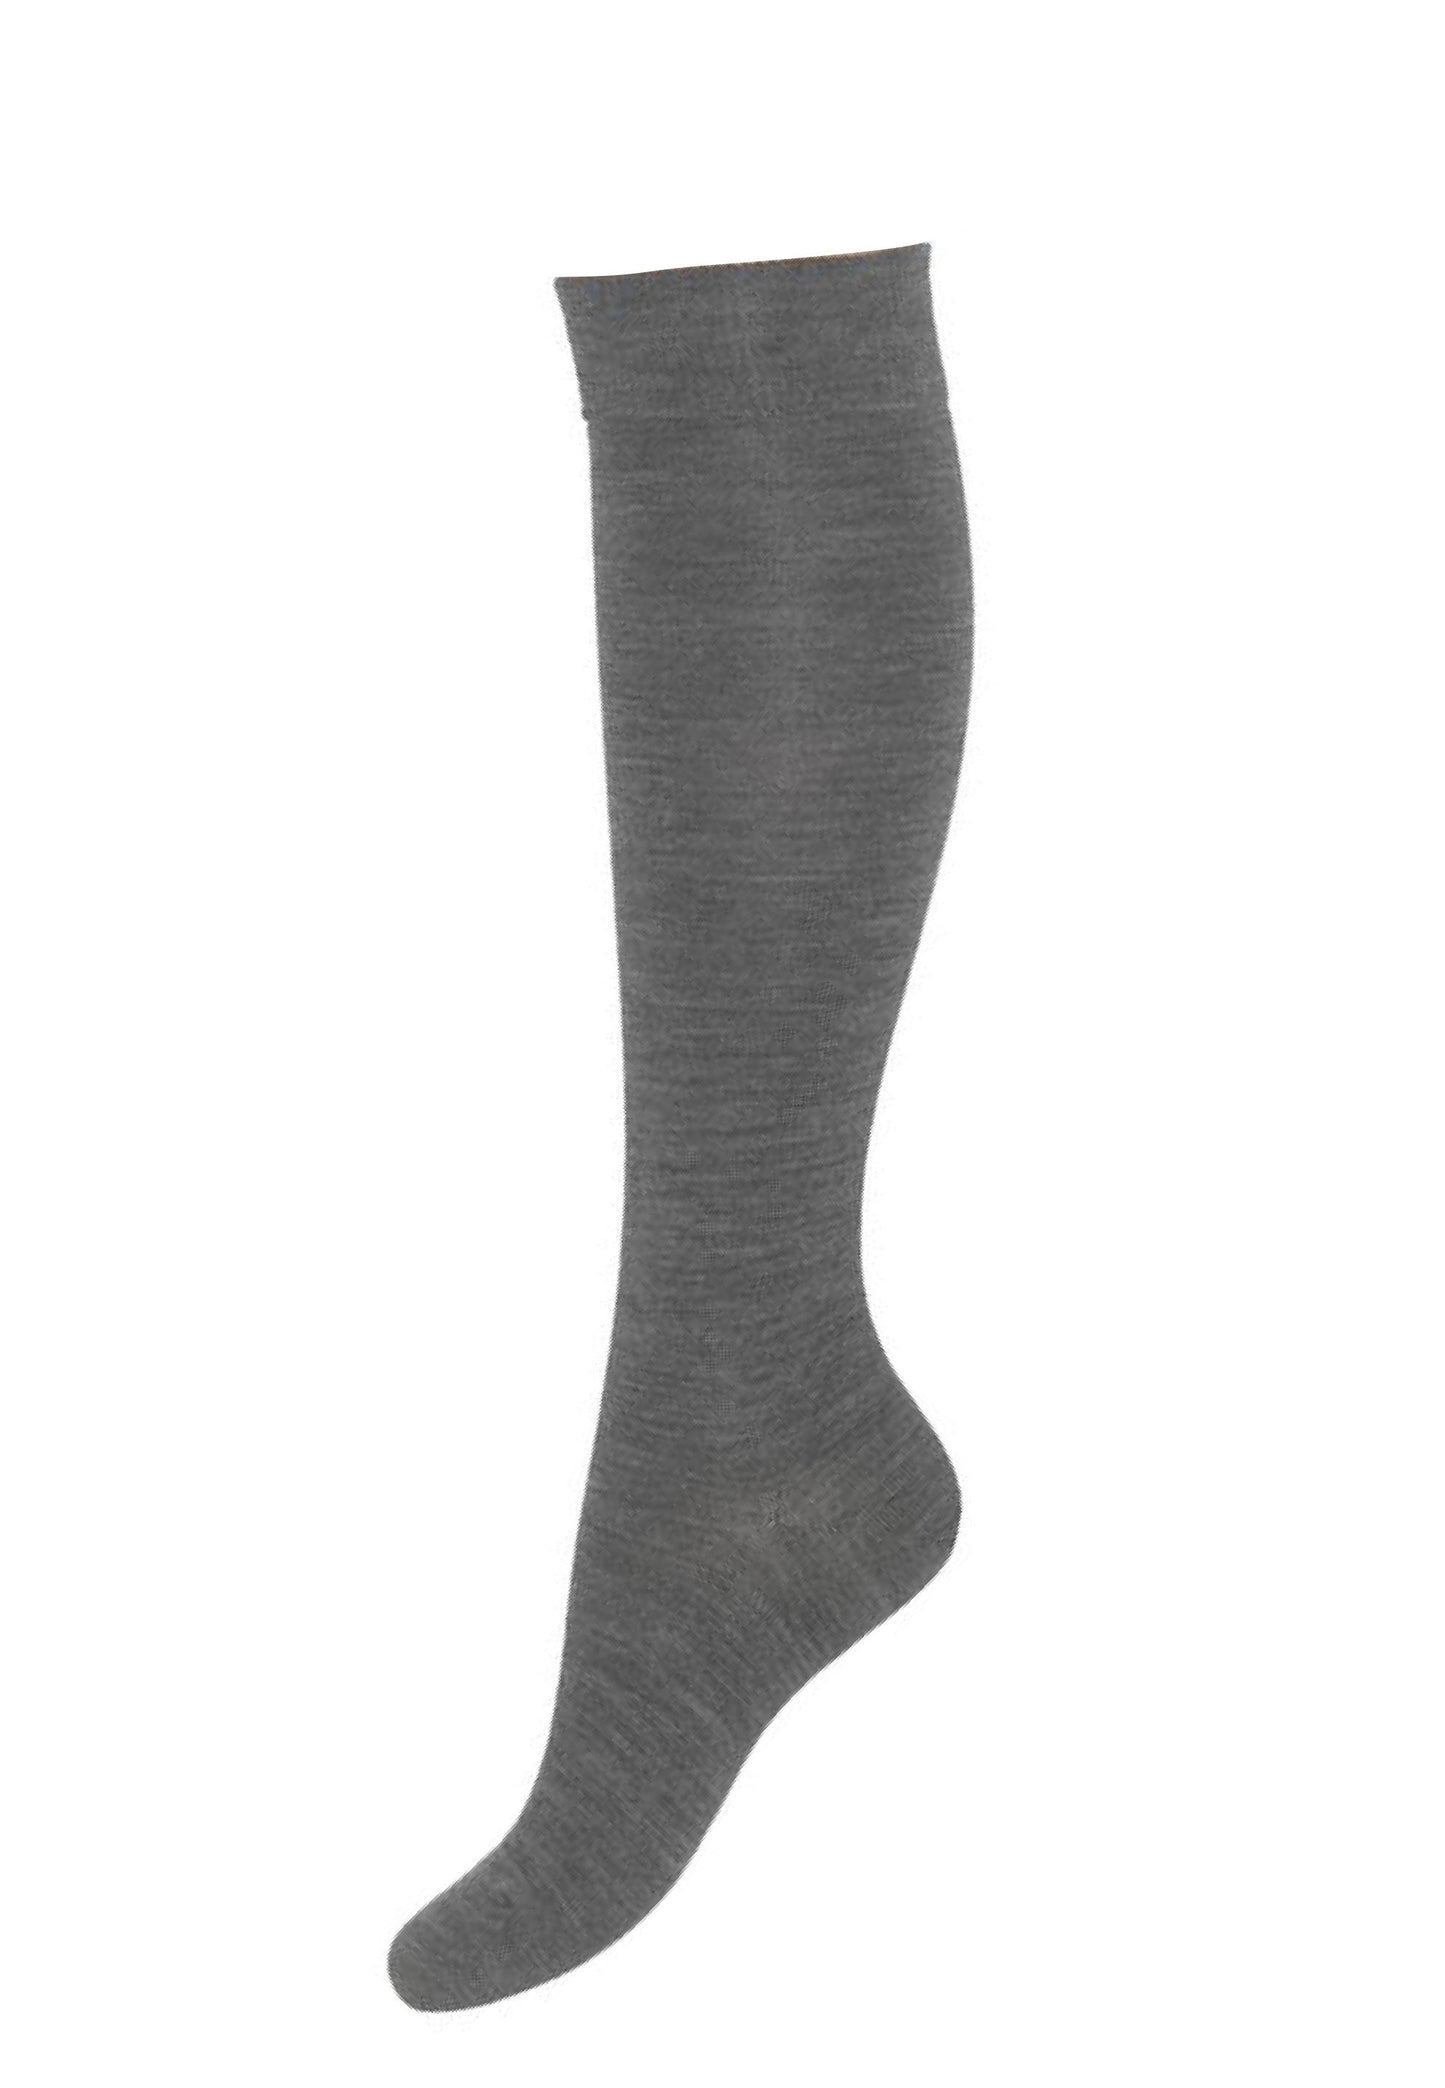 Bonnie Doon Wool/Cotton Knee-High R715011 - grey thermal knee socks perfect for cold Winters